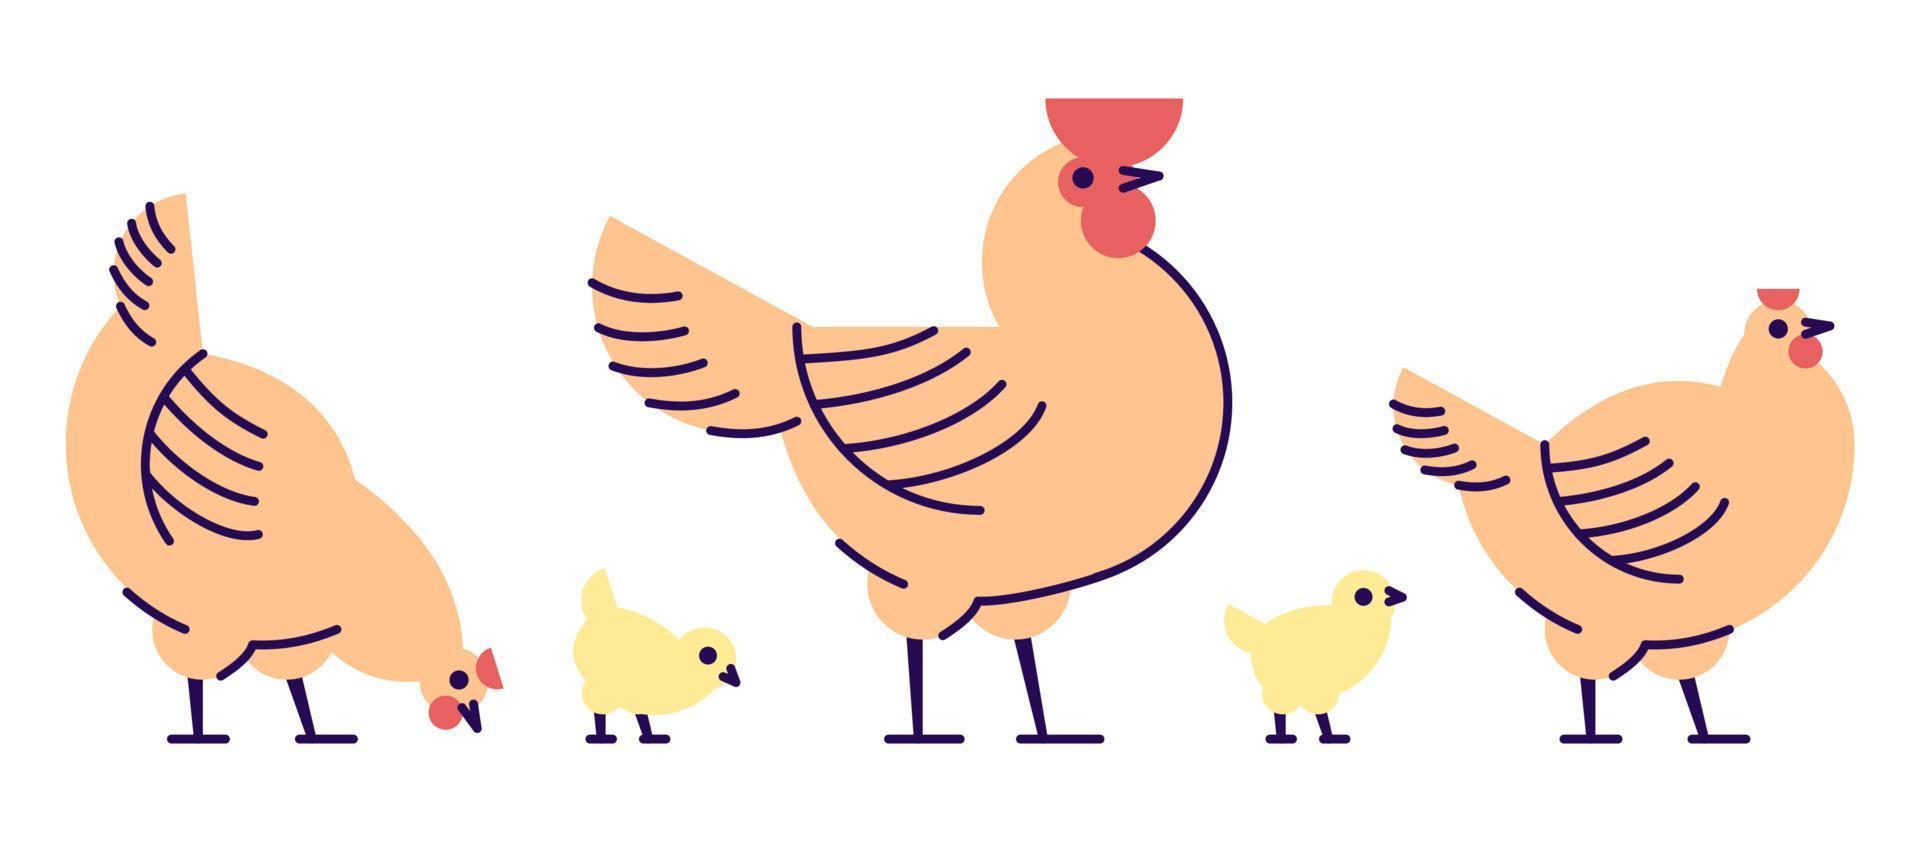 Chicken flat vector illustration. Isolated orange rooster, hens and yellow cute chicks. Hennery, poultry farm, bird breeding cartoon design elements with outline. Chicken meat production